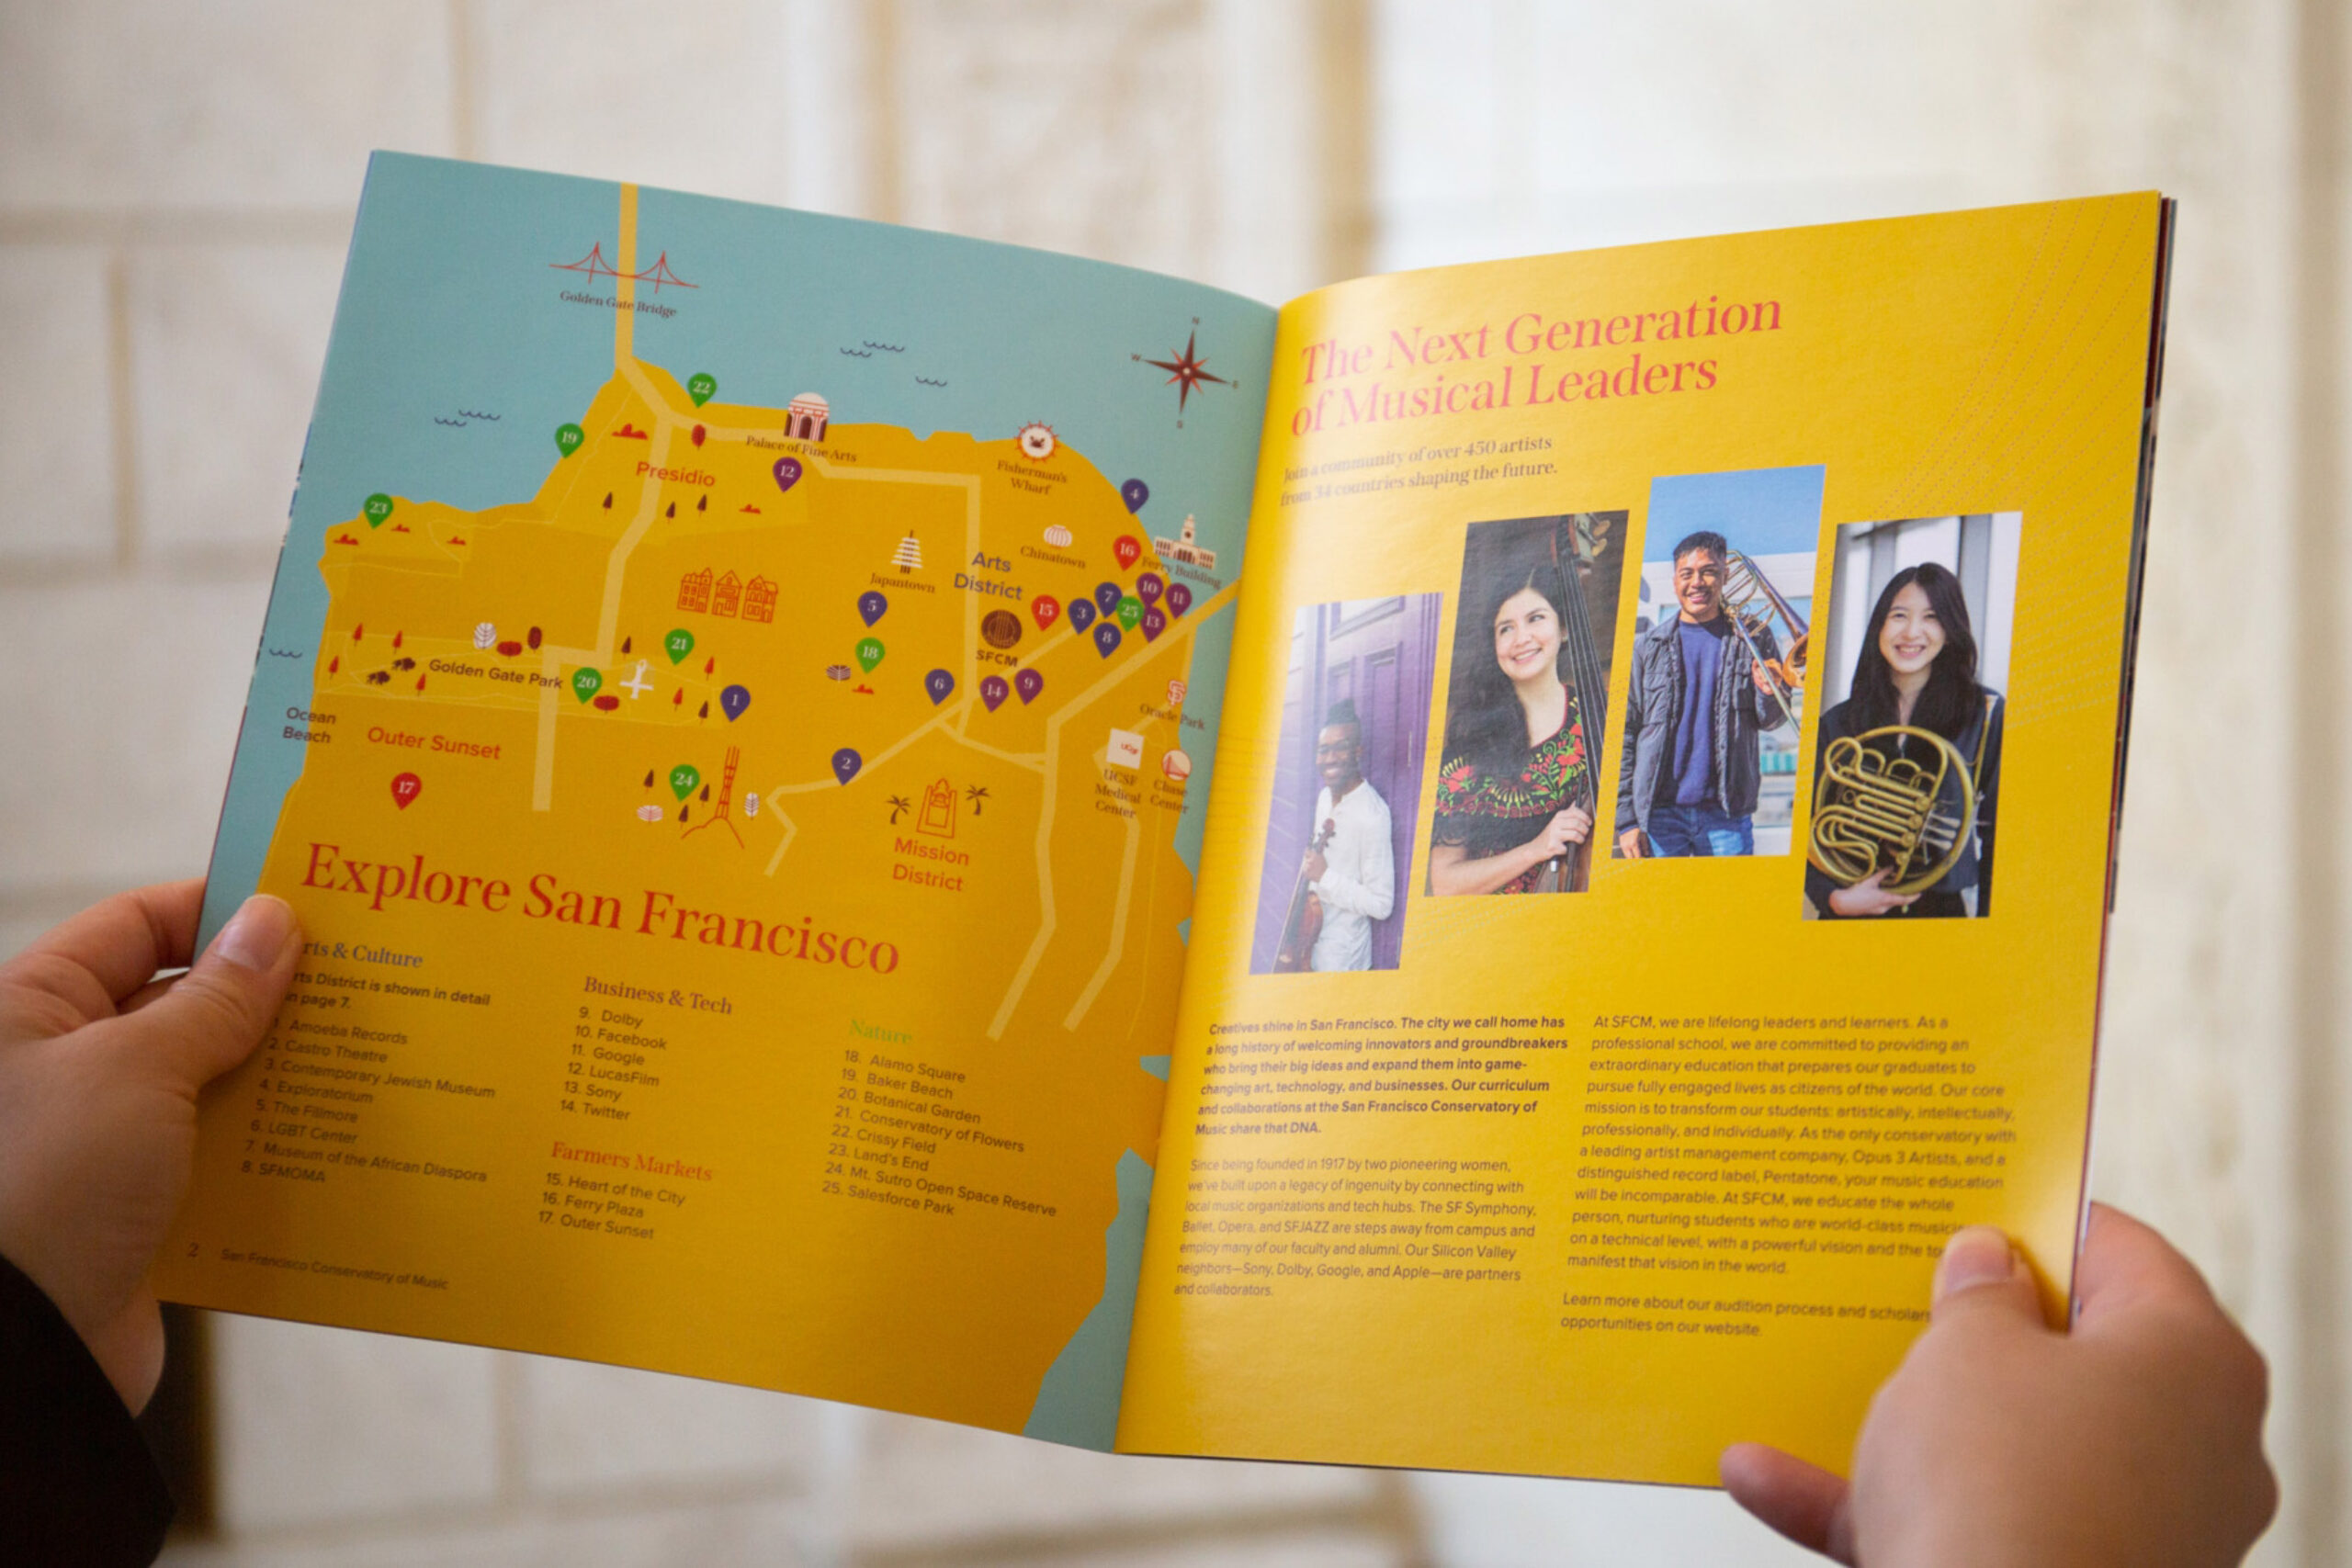 Custom illustrated map of SF. The Next Generation of Musical Leaders. Interior spread of San Francisco Conservatory of Music lookbook.